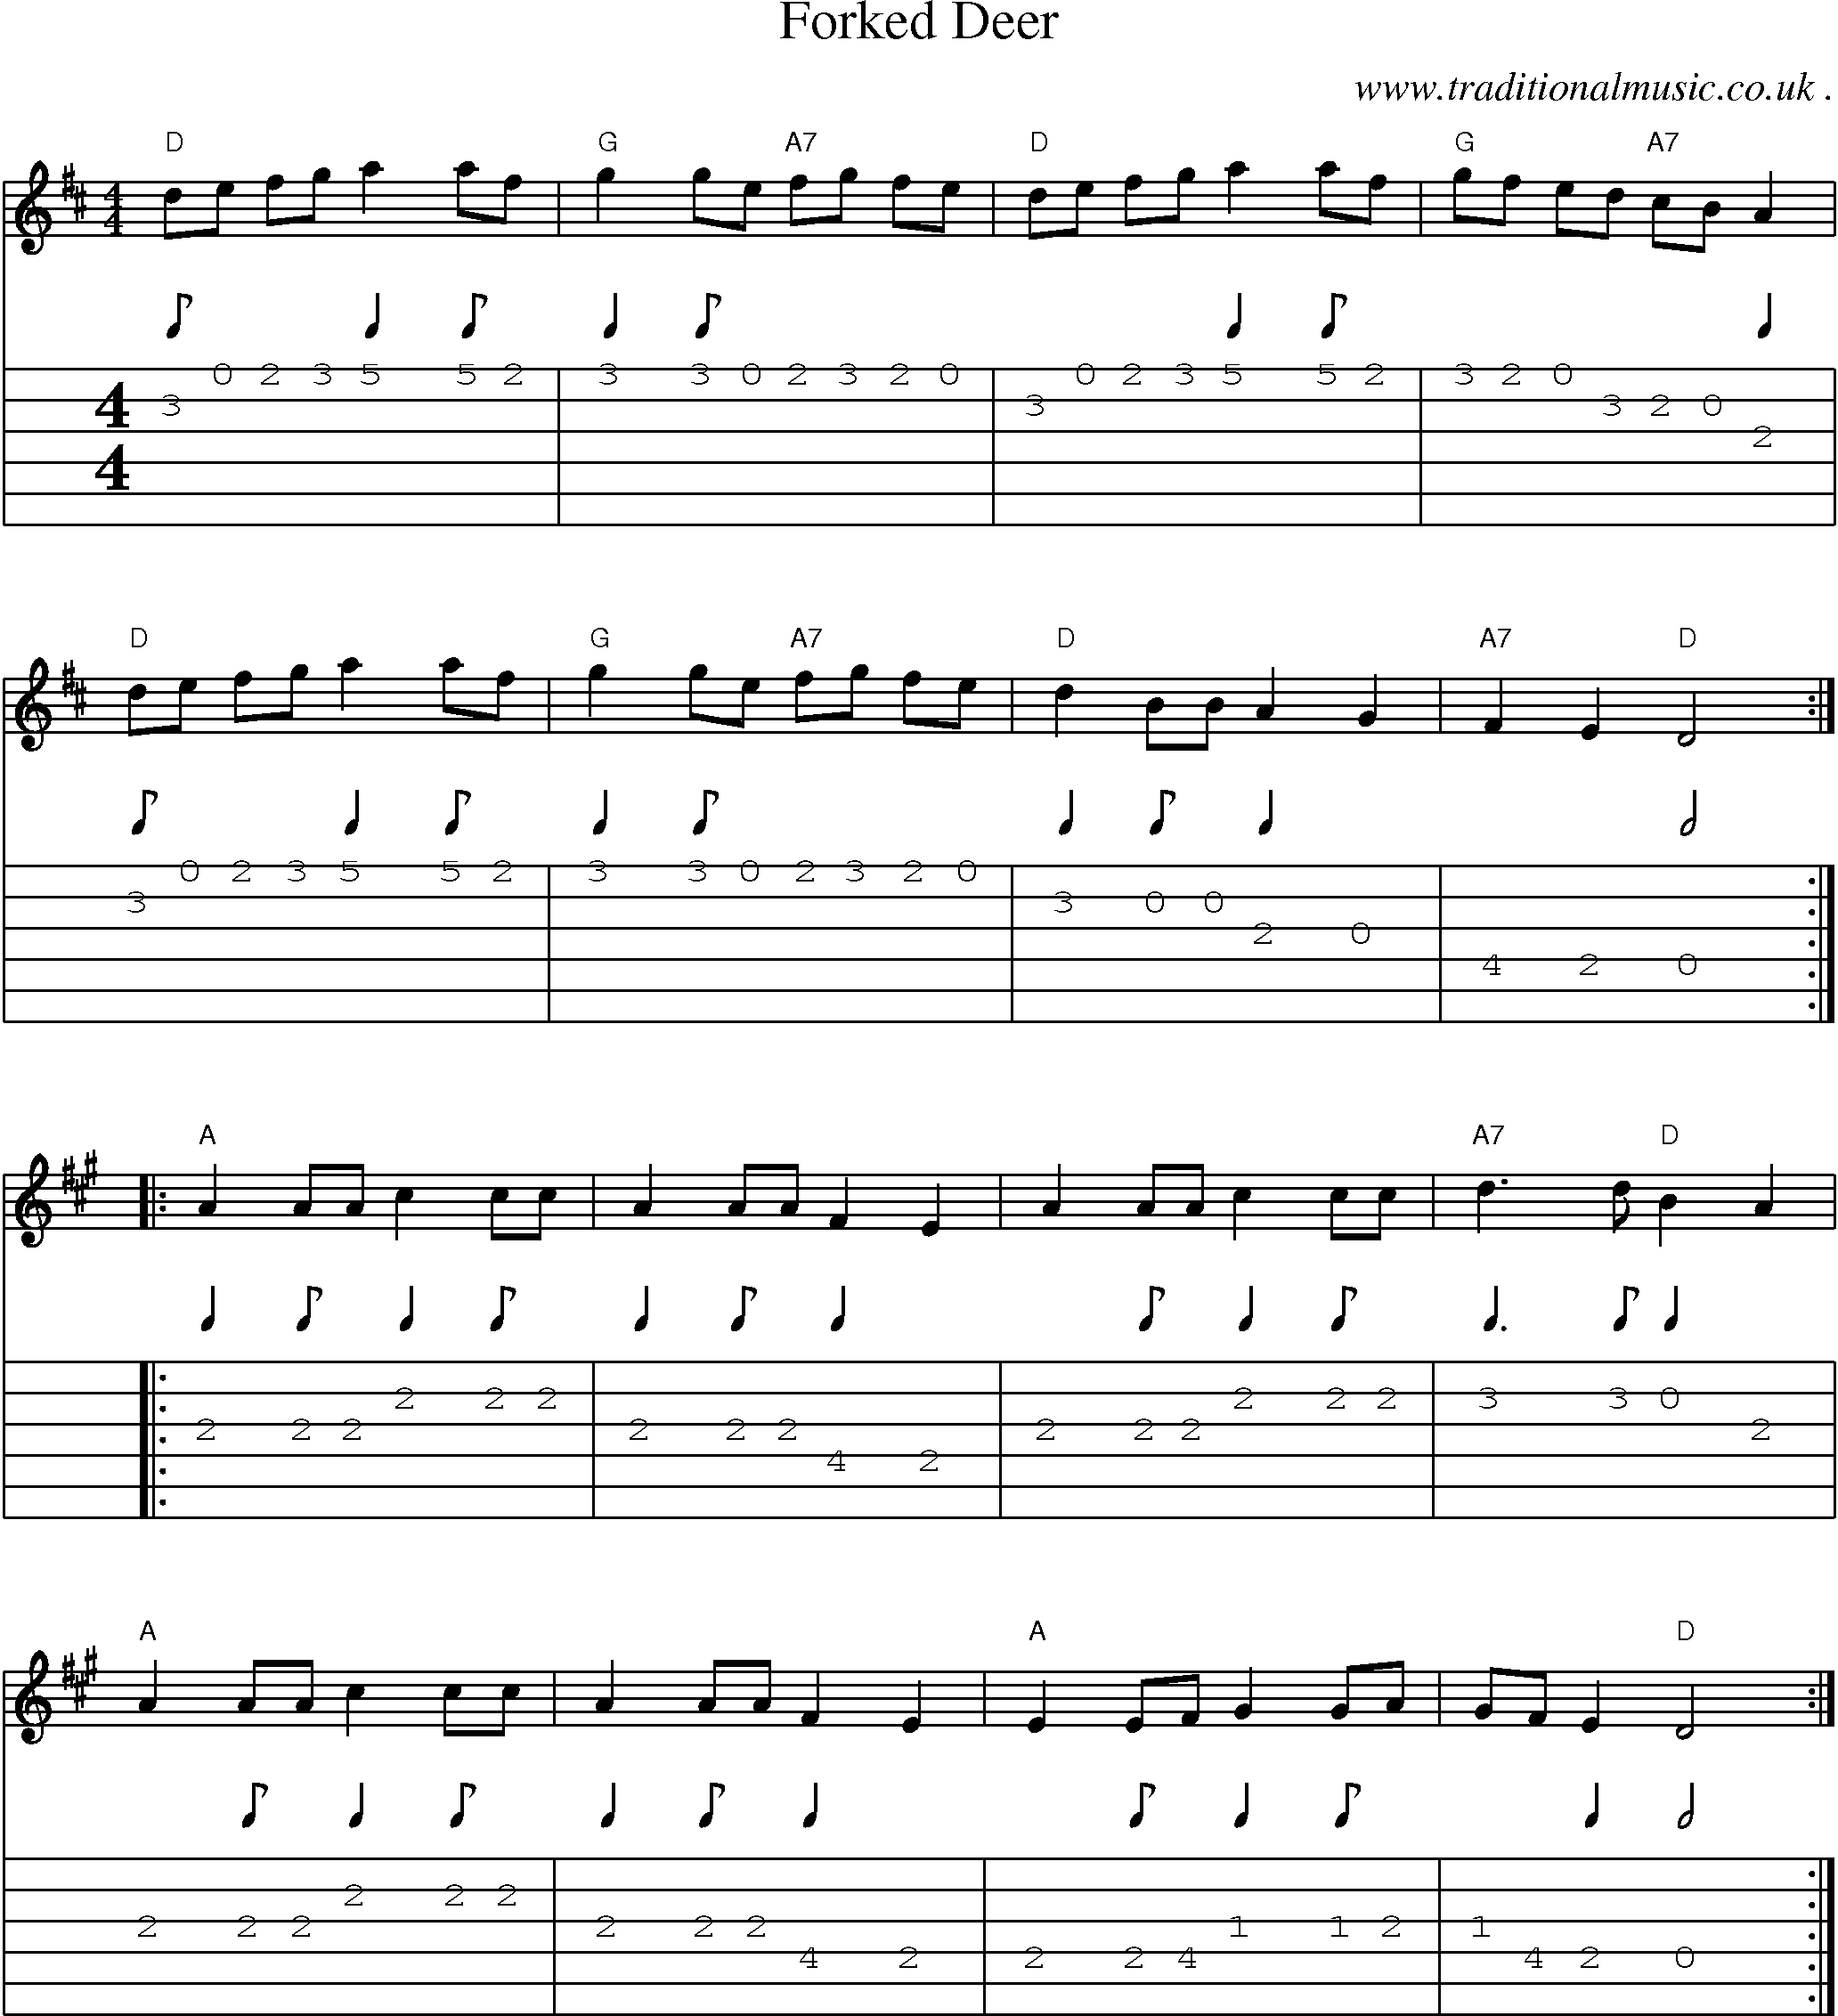 Music Score and Guitar Tabs for Forked Deer